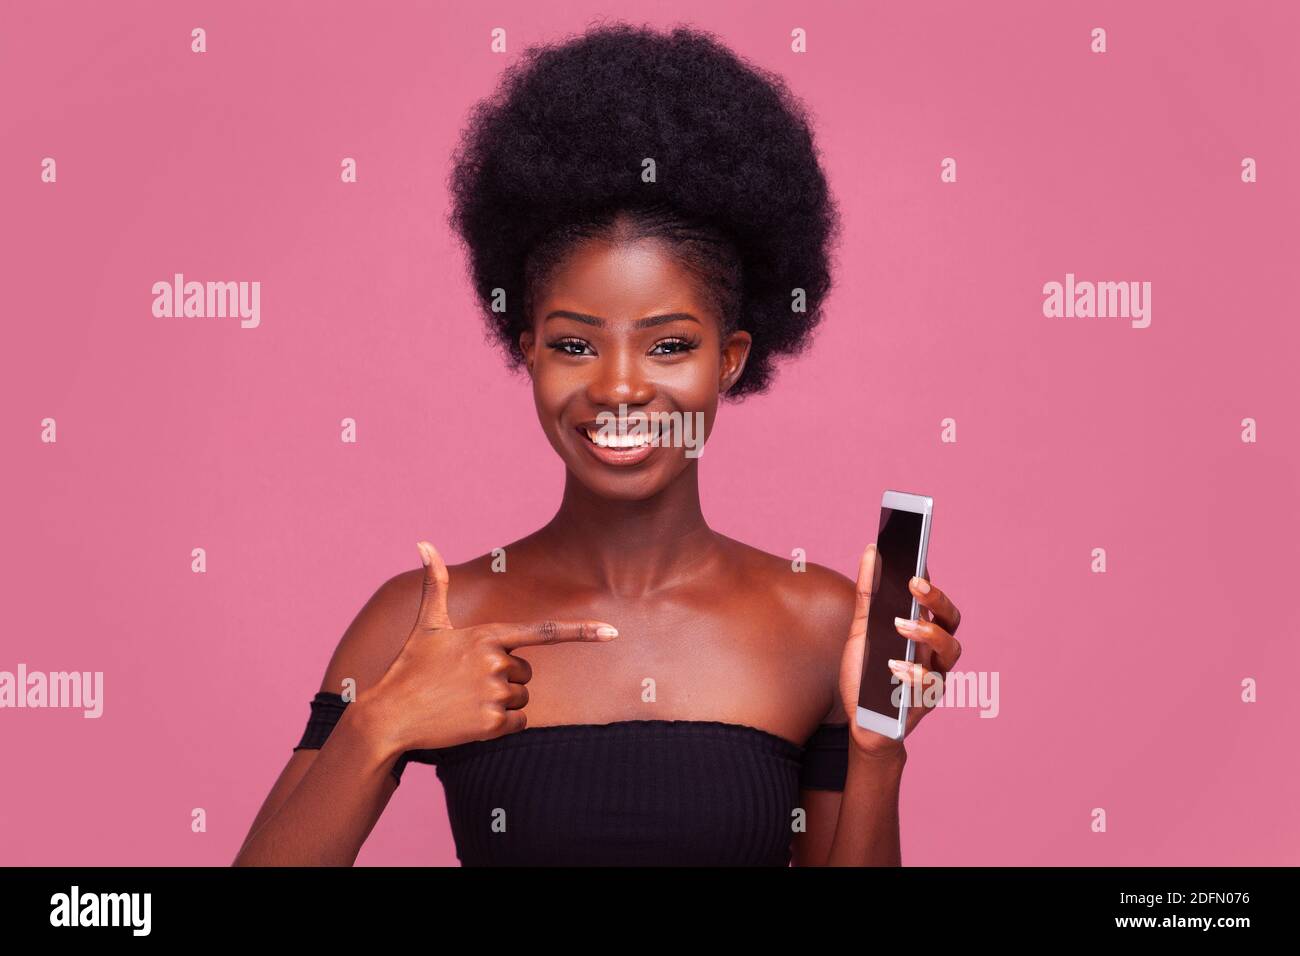 Call me. Cheerful African American young girl pointing finger at phone saying call me with gorgeous afro hairstyle standing smiling in black shoulder Stock Photo